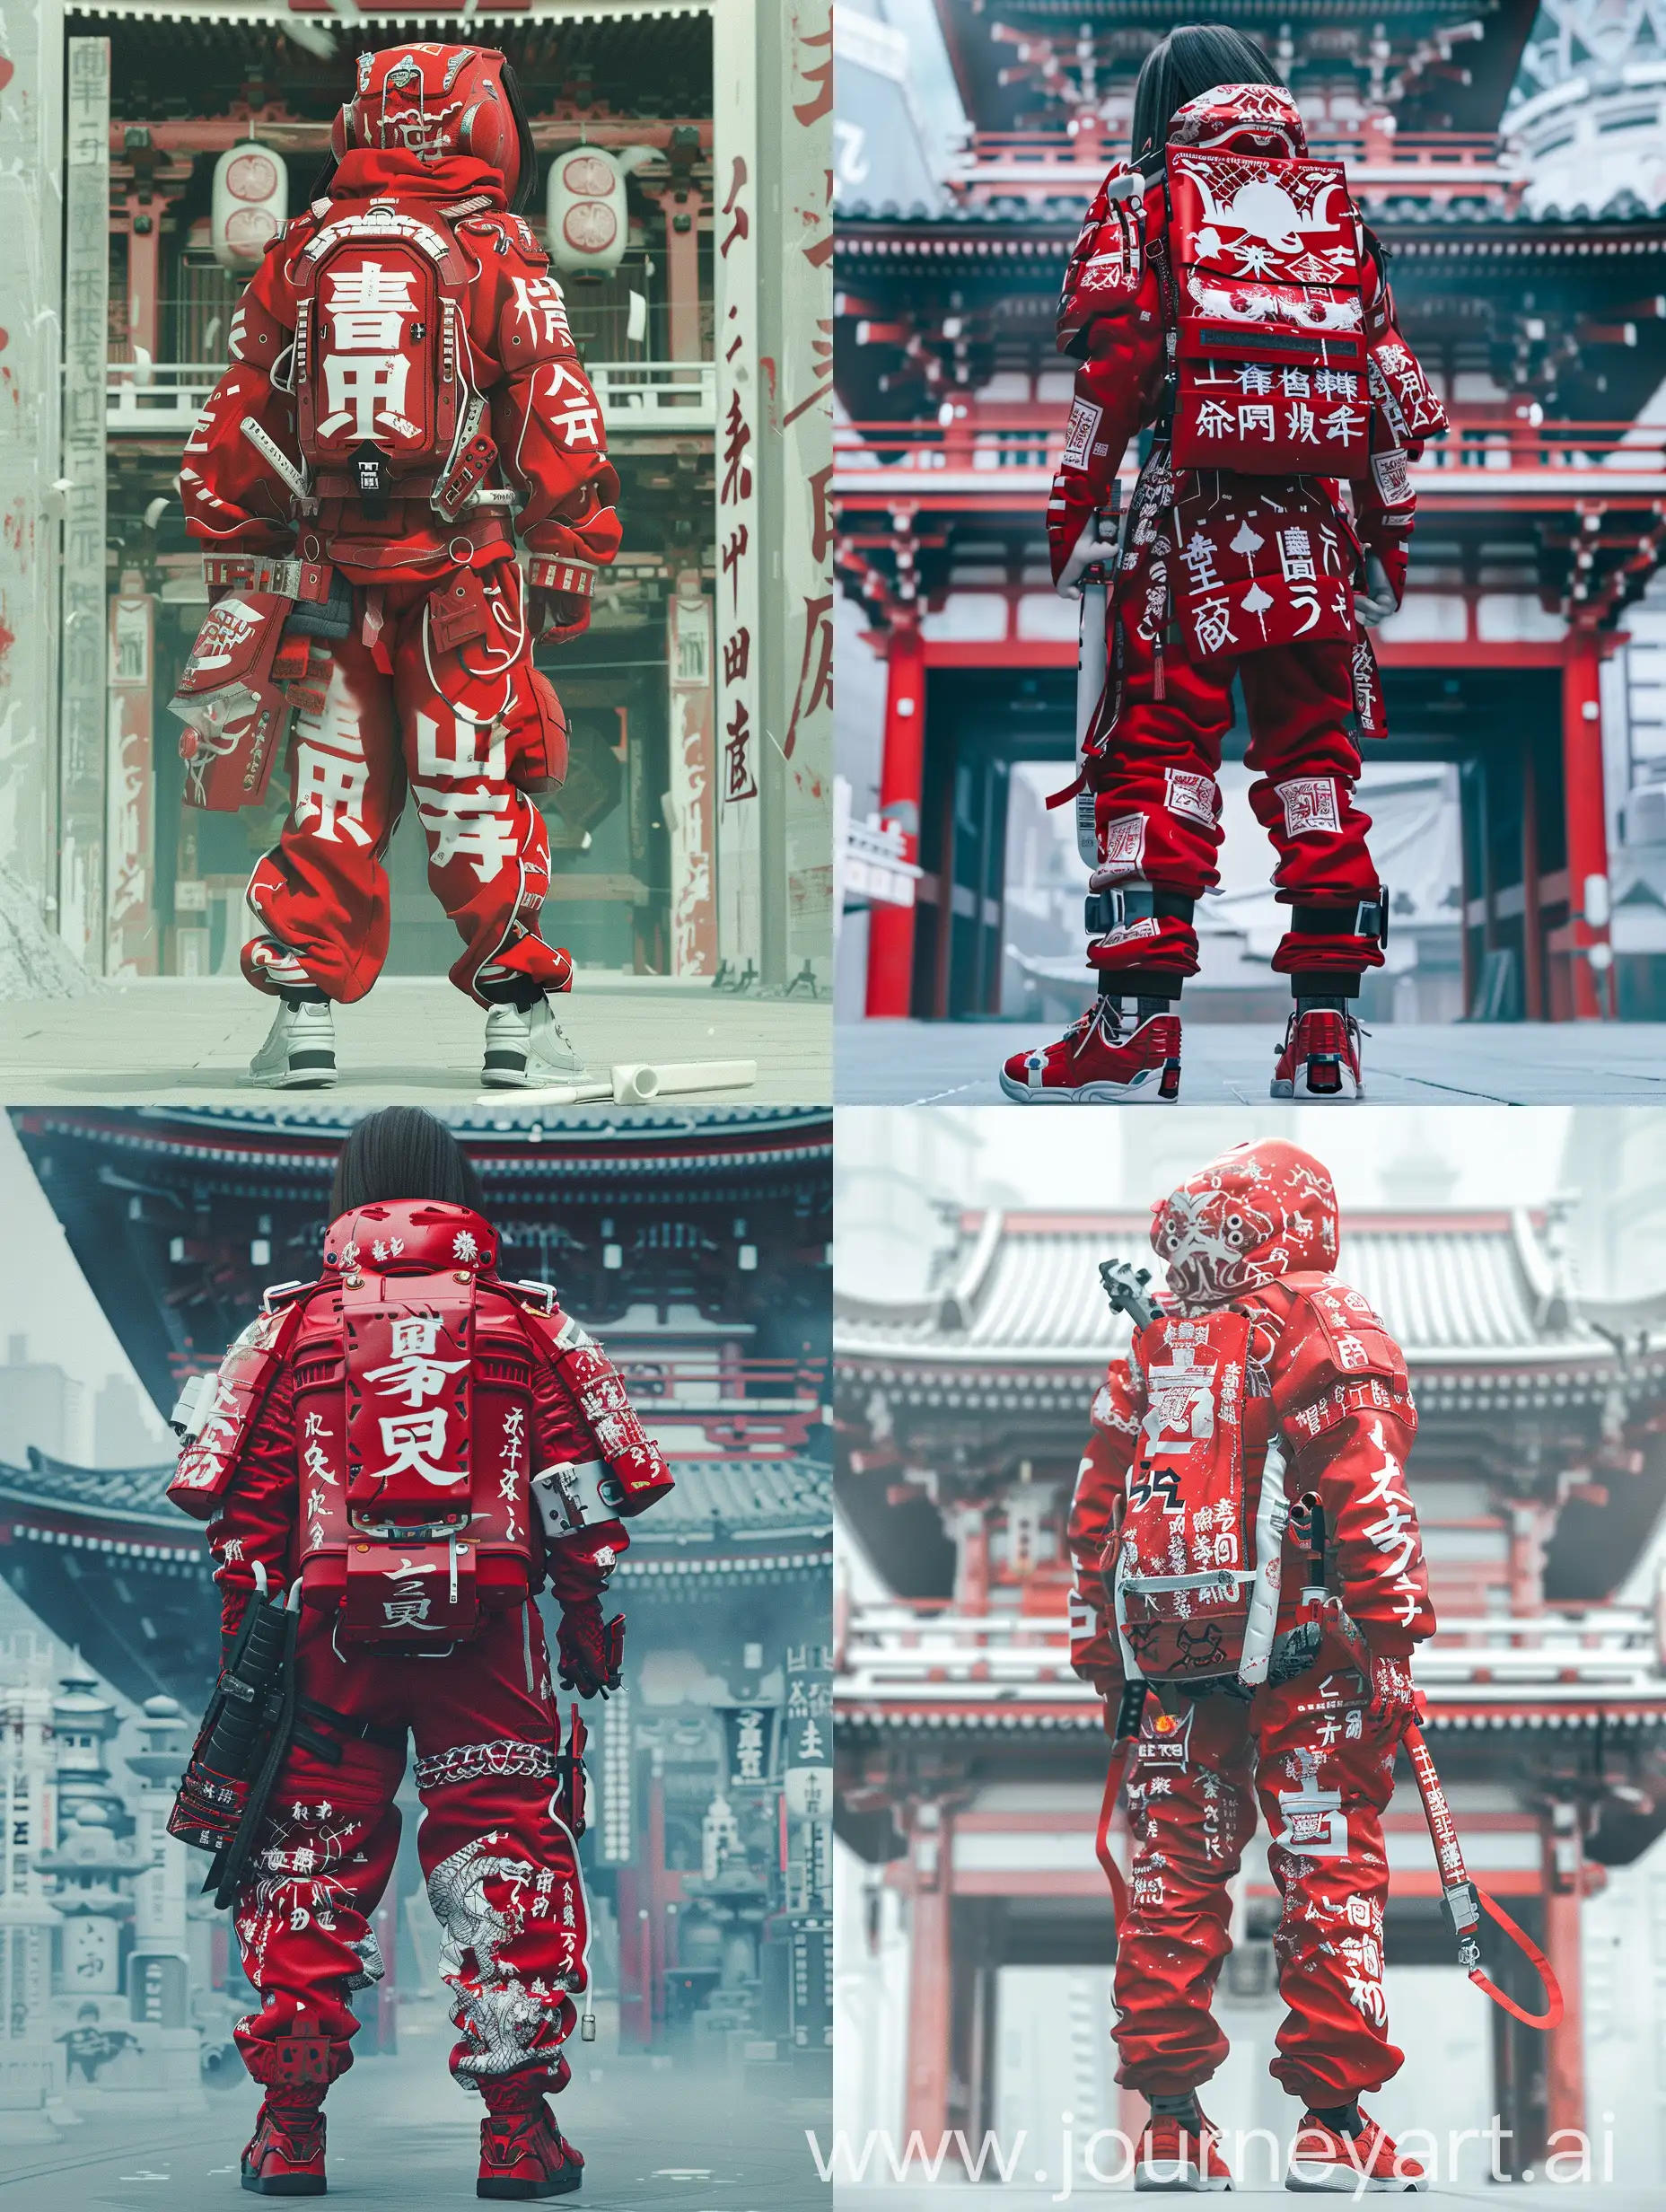 Cyberpunk-Warrior-in-Elaborate-Red-Armor-at-Japanese-Temple